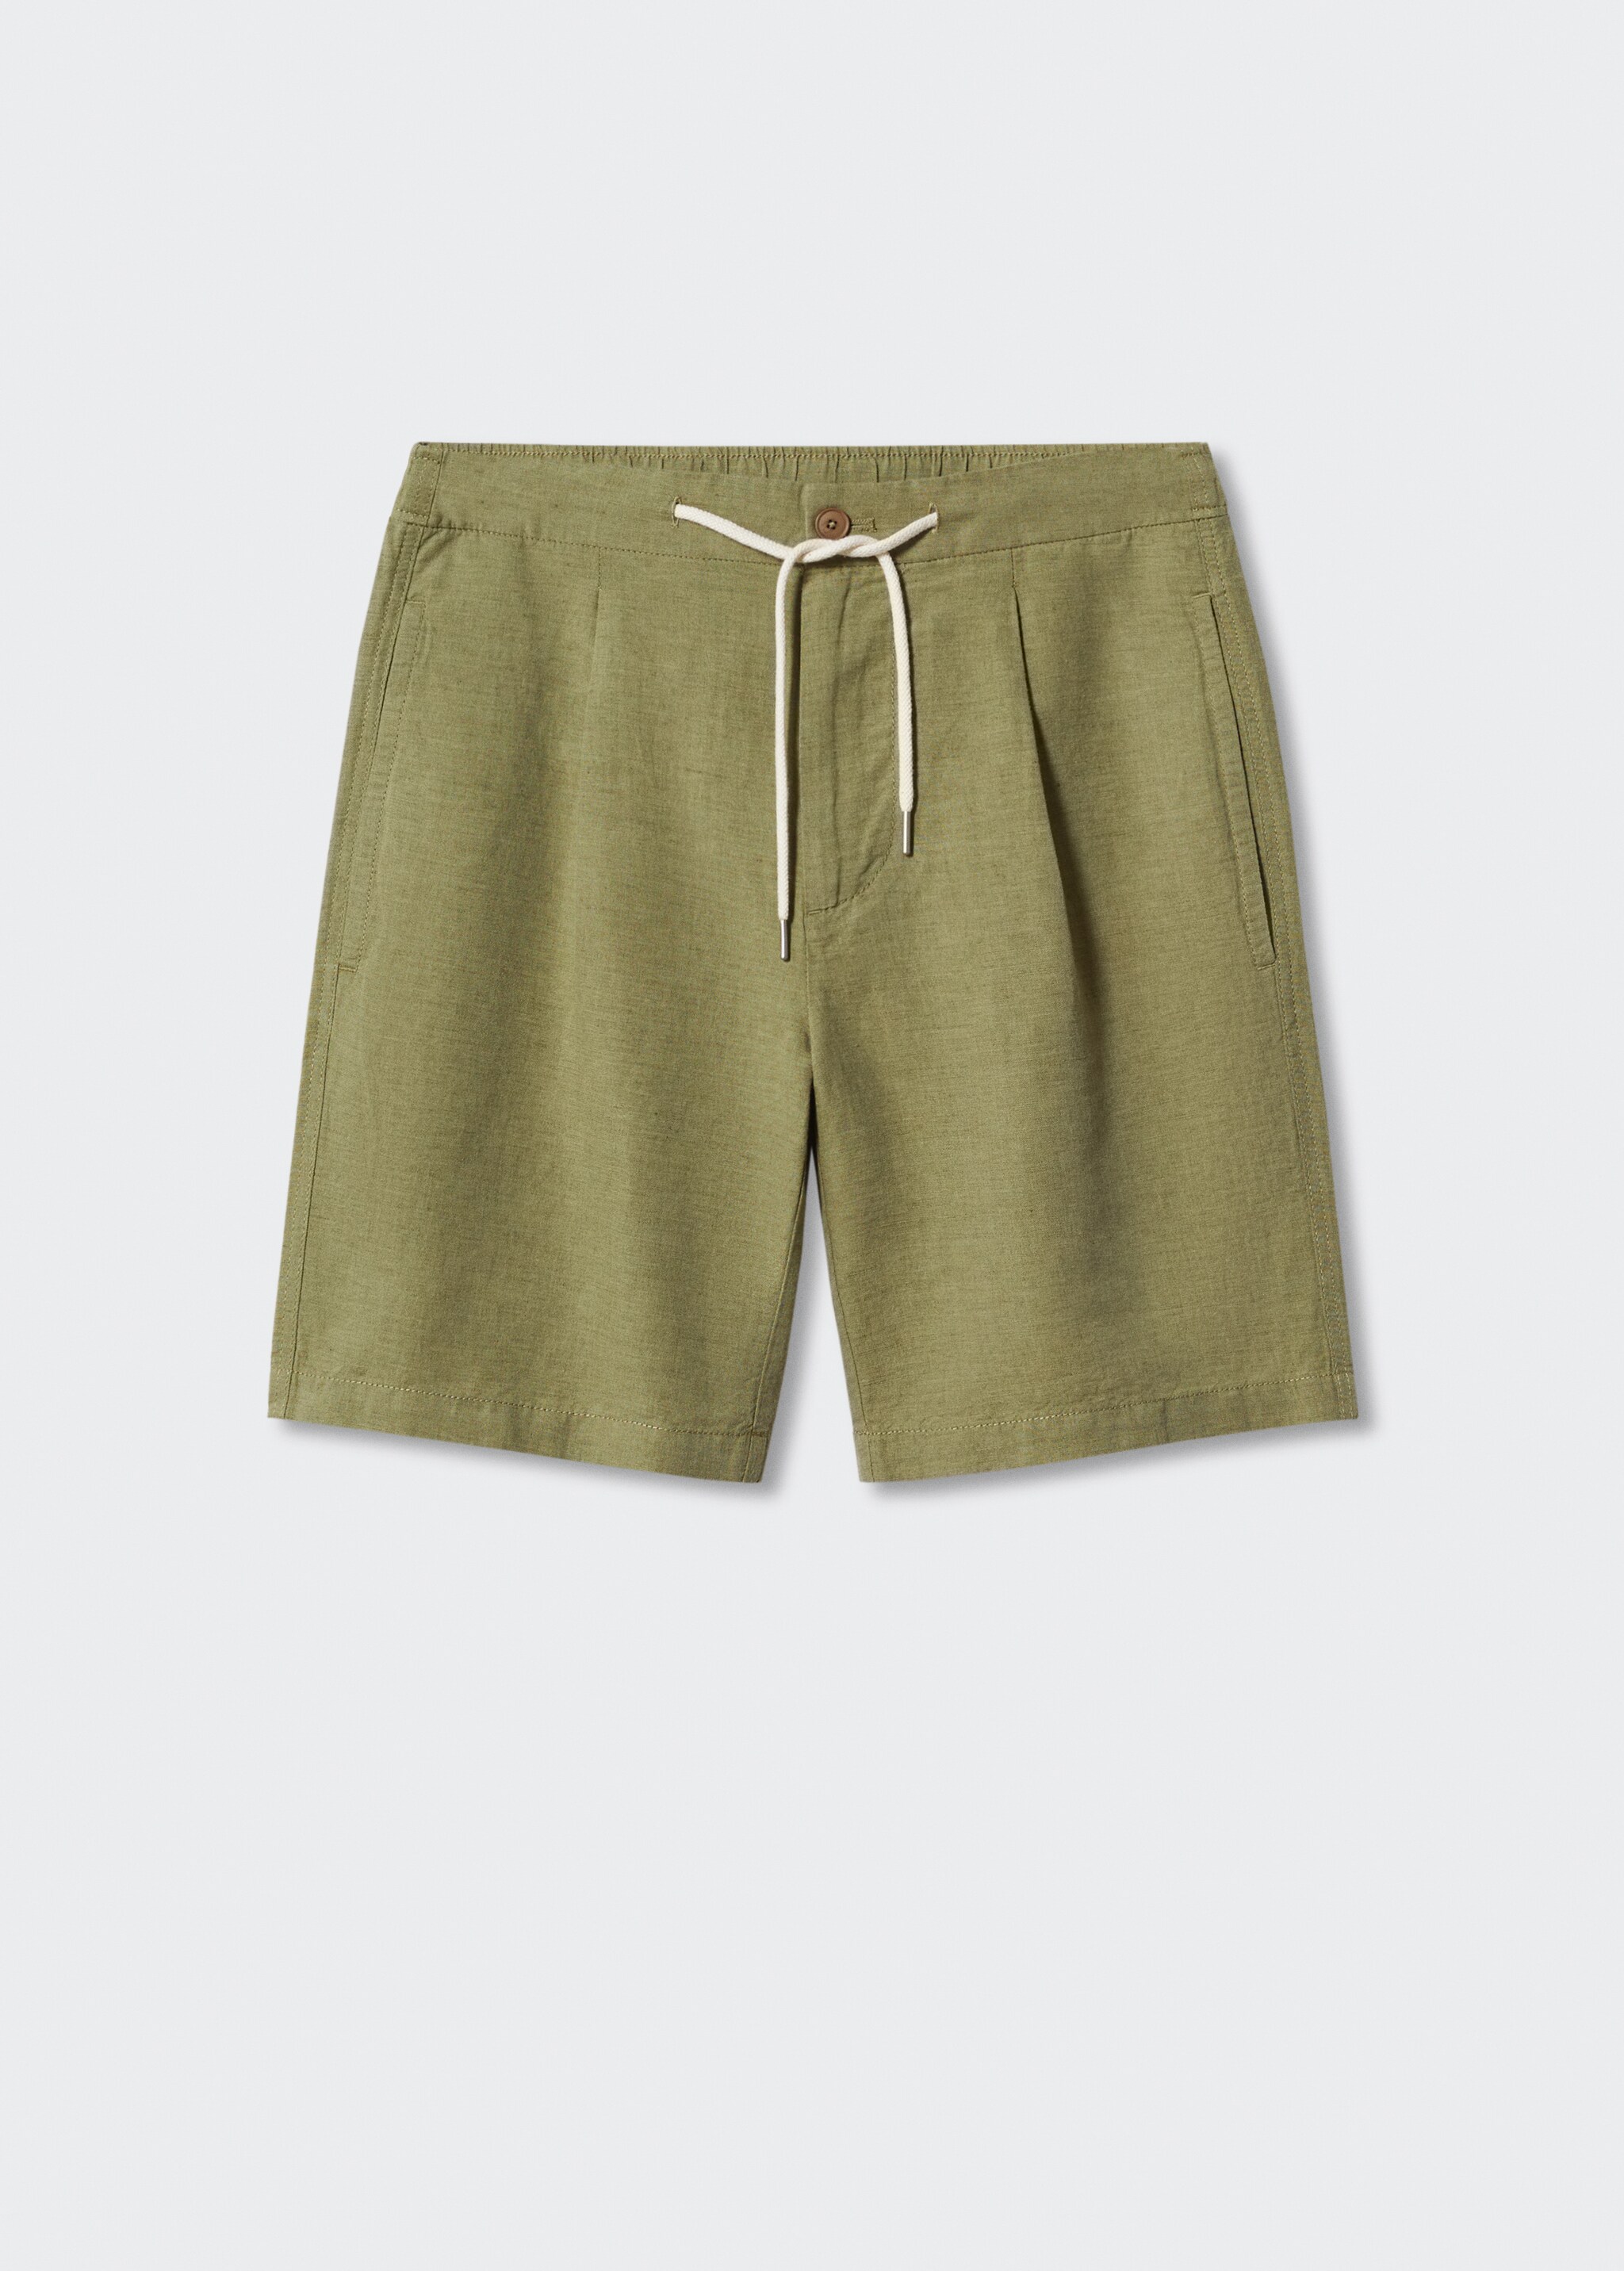 Drawstring linen Bermuda shorts - Article without model